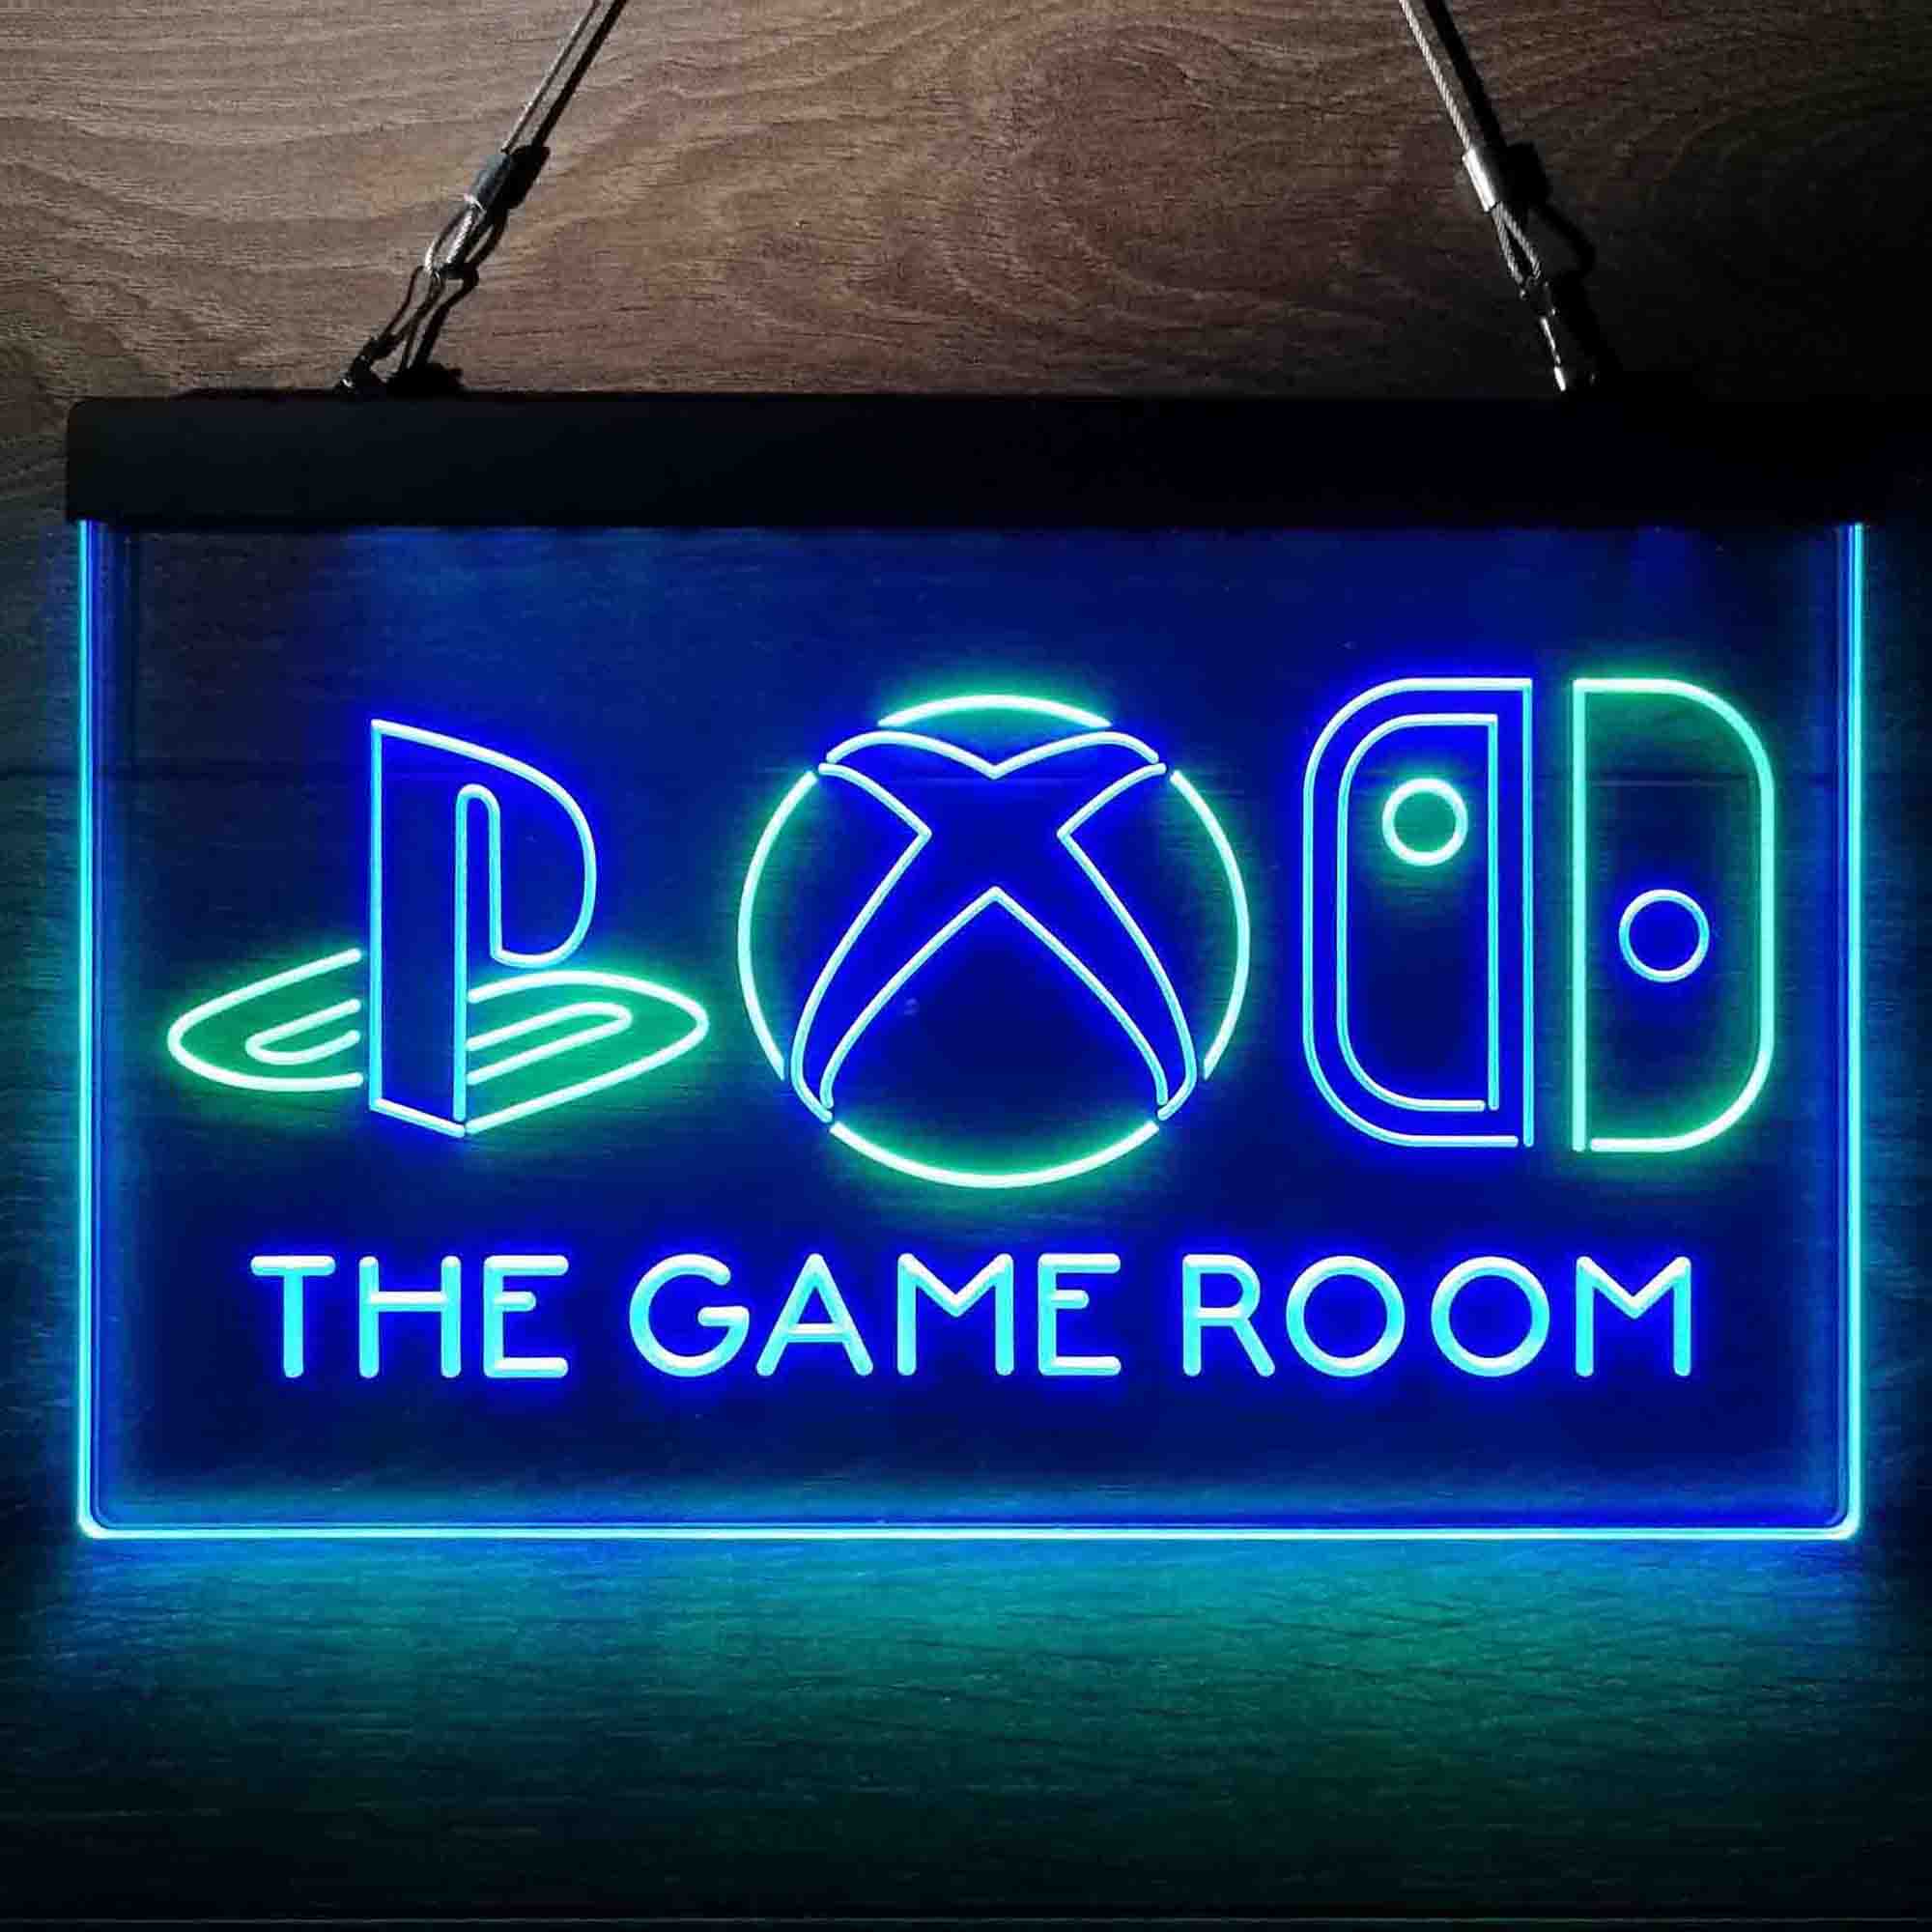 Custom PlayStation Xbox Switch Game Room Neon-Like LED Sign - Birthday Day Gift